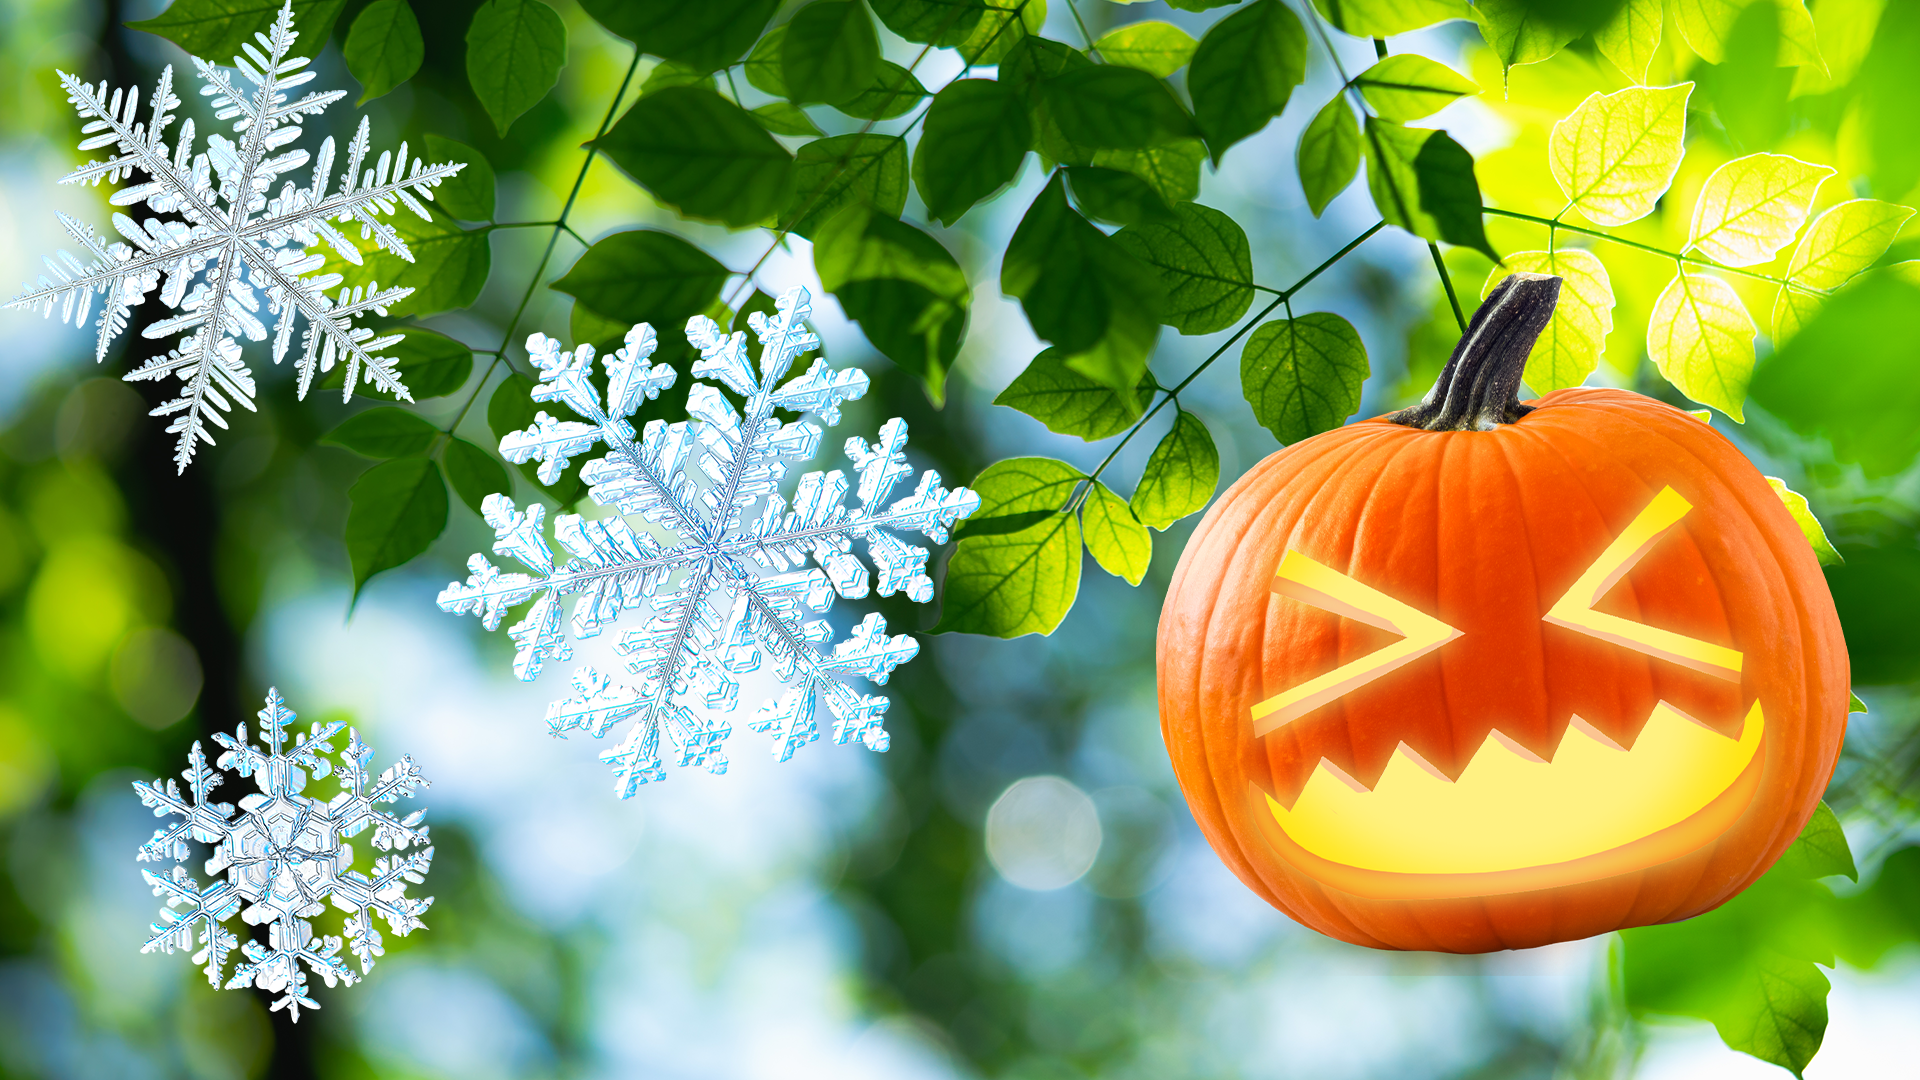 Leaves, snowflakes and pumpkin